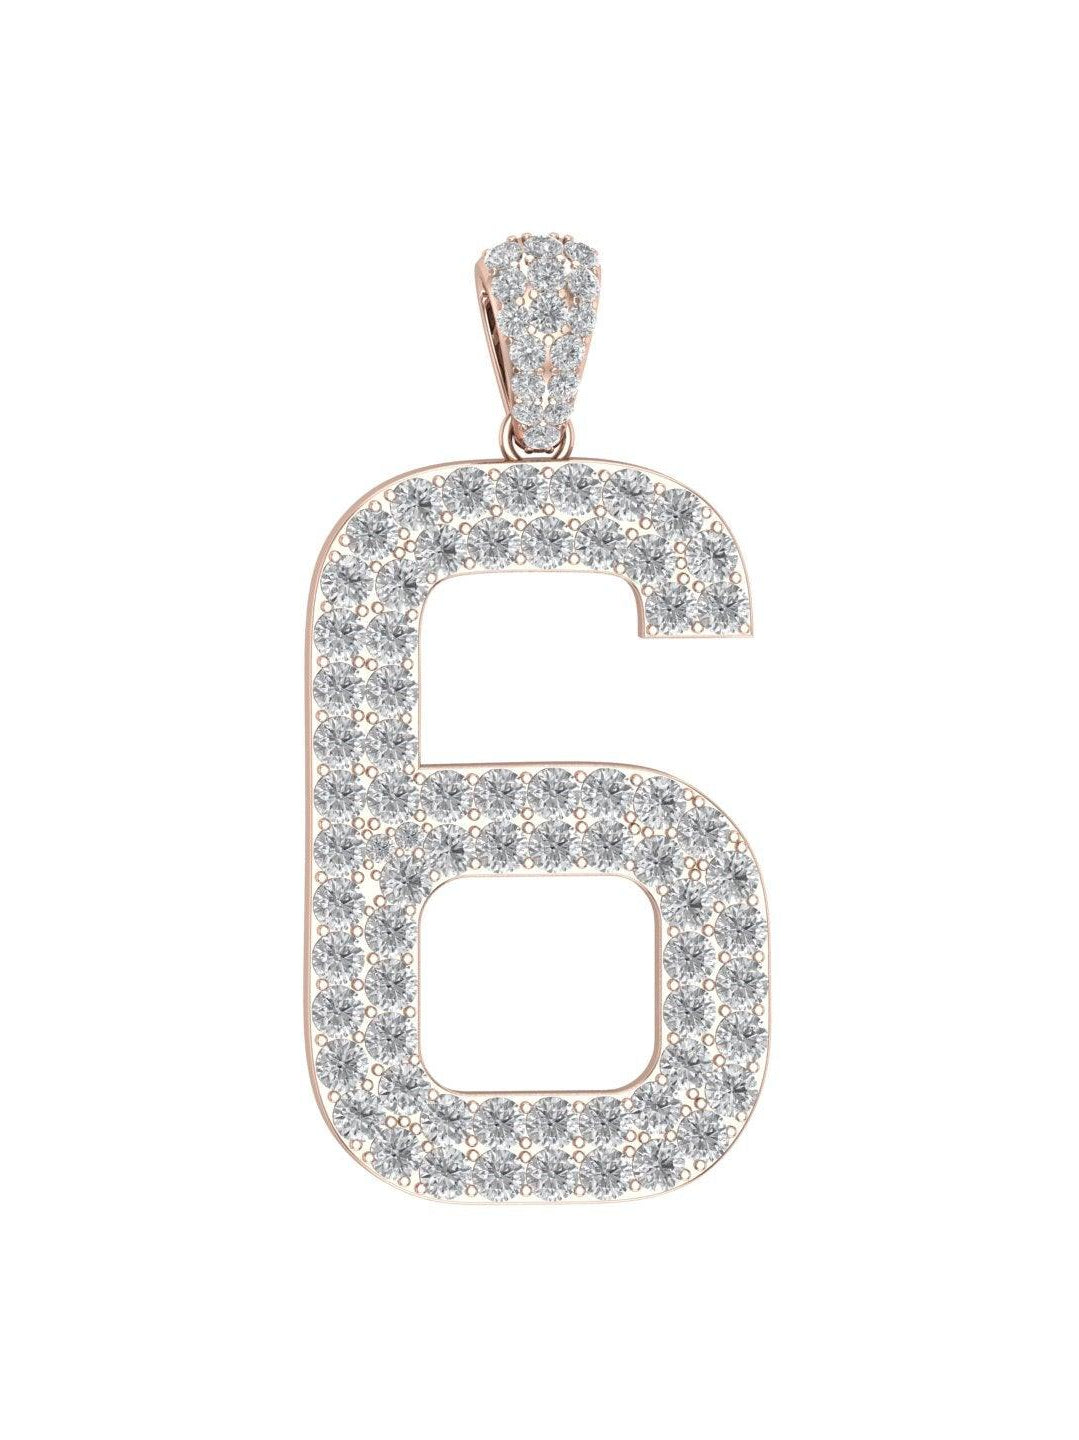 Rose Gold Color Pendant in the Shape of 6 Made of 925 Sterling Silver Material with 20 Inch Long Silver Chain